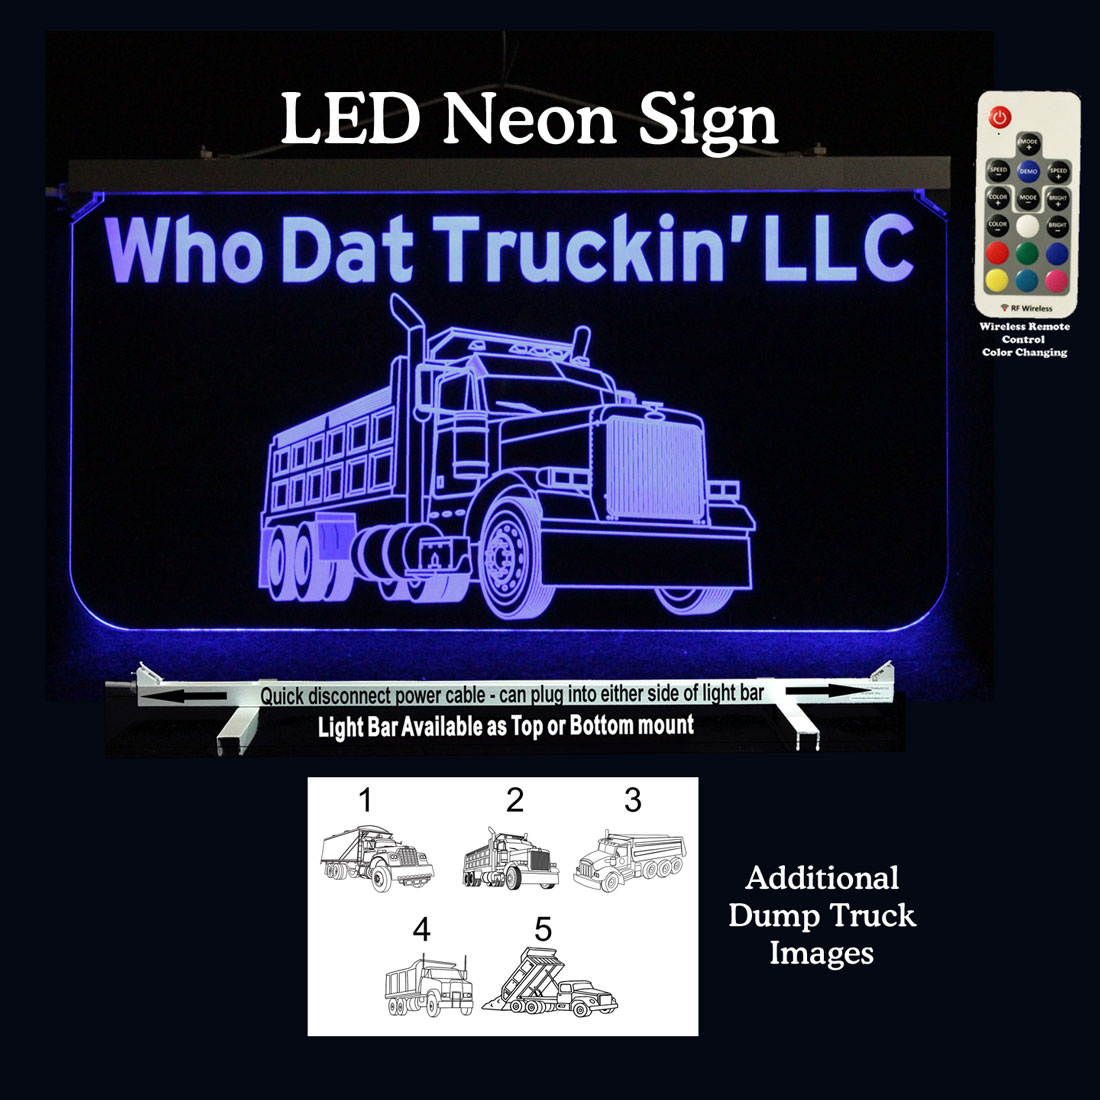 Custom LED Neon Sign with Dump Truck design, man cave sign